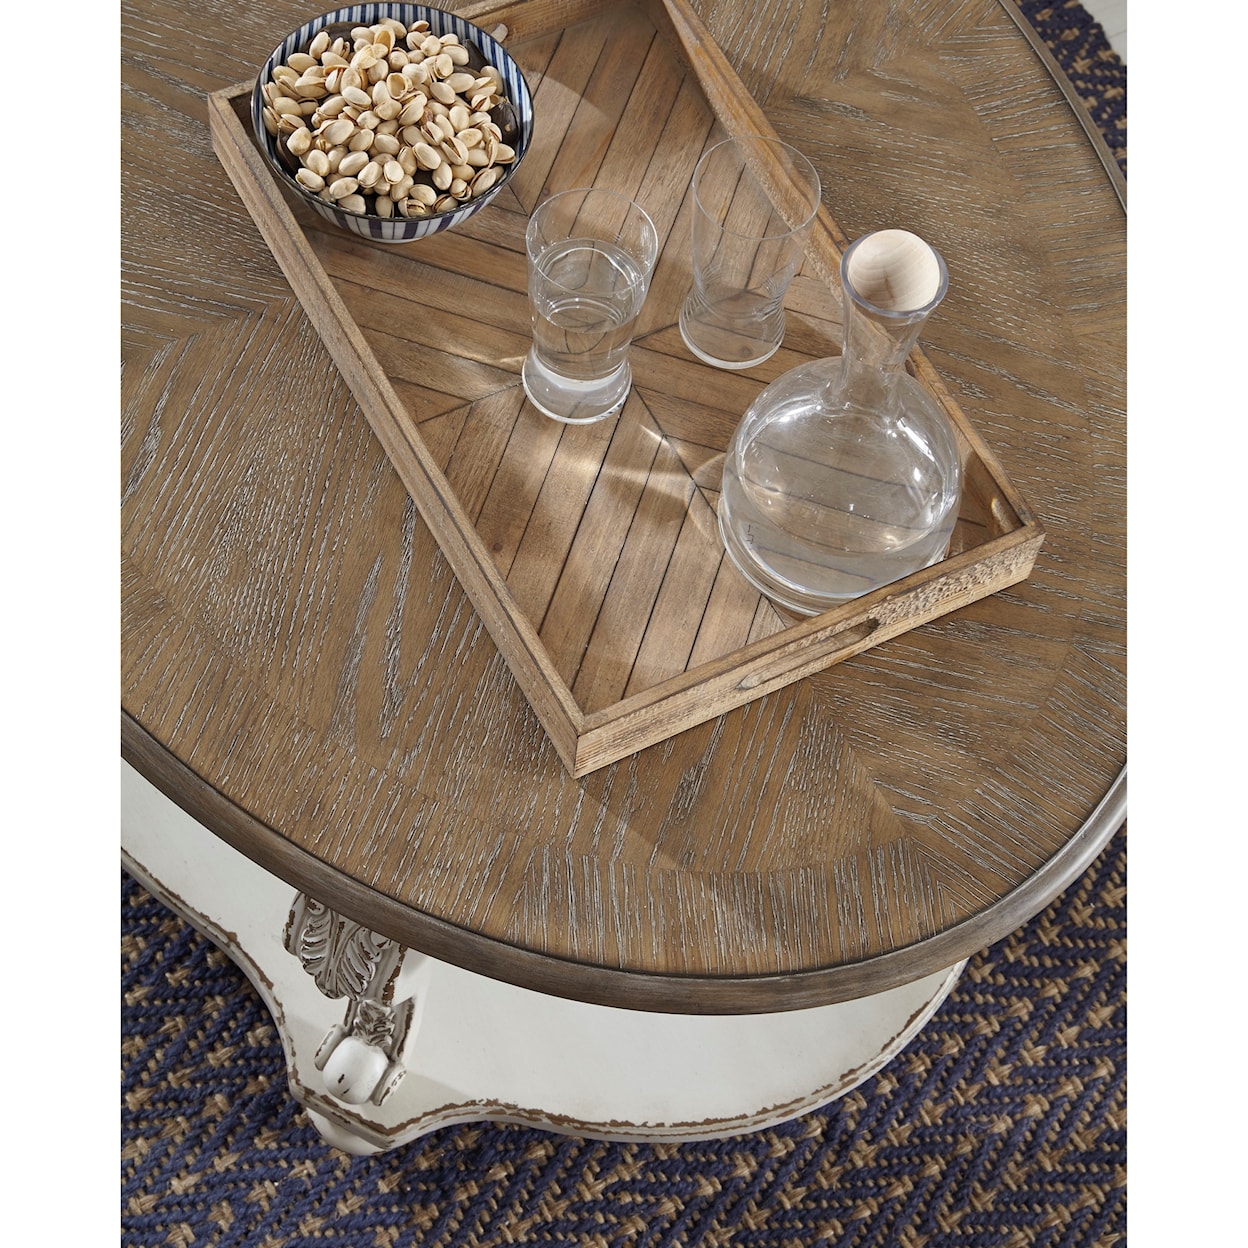 Ashley Furniture Signature Design Realyn Oval Cocktail Table